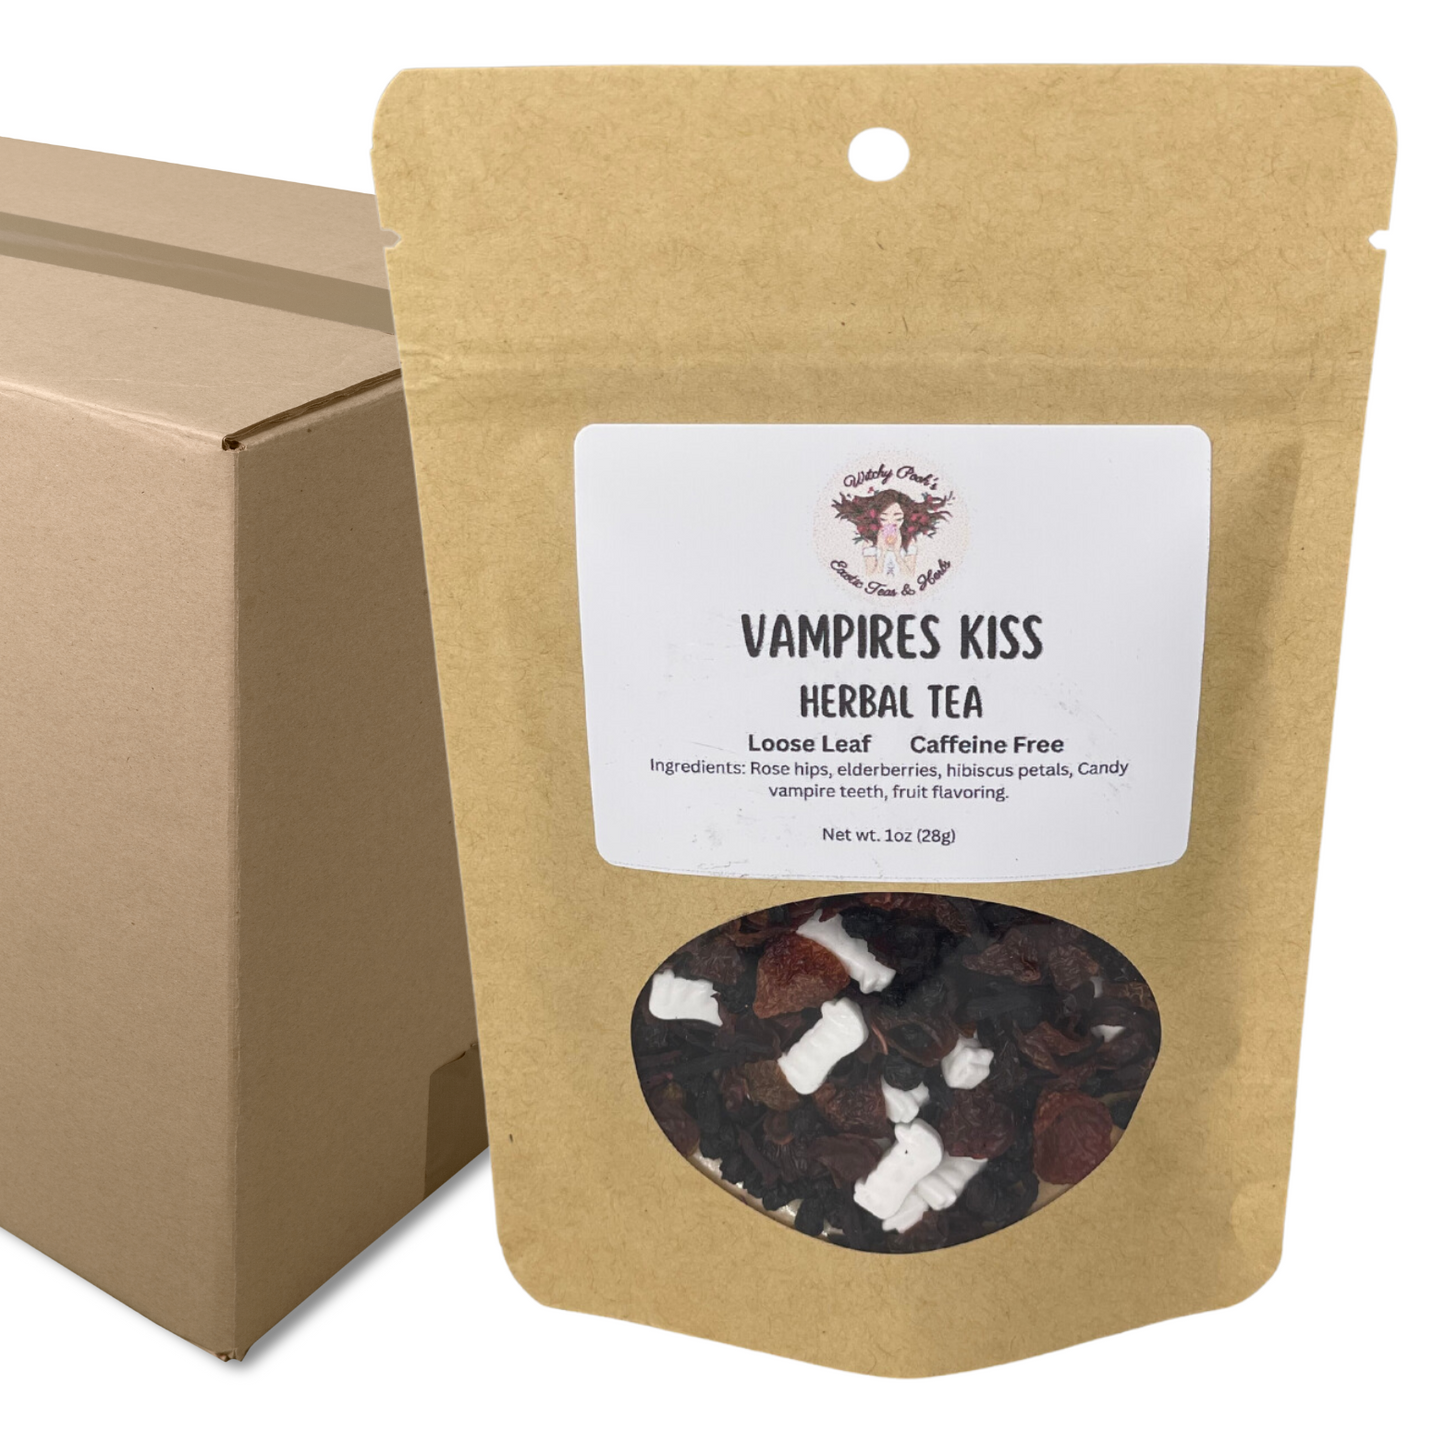 Witchy Pooh's Vampire's Kiss Loose Leaf Fruit Elderberry Herbal Tea with Candy Vampire Teeth, Caffeine Free-21